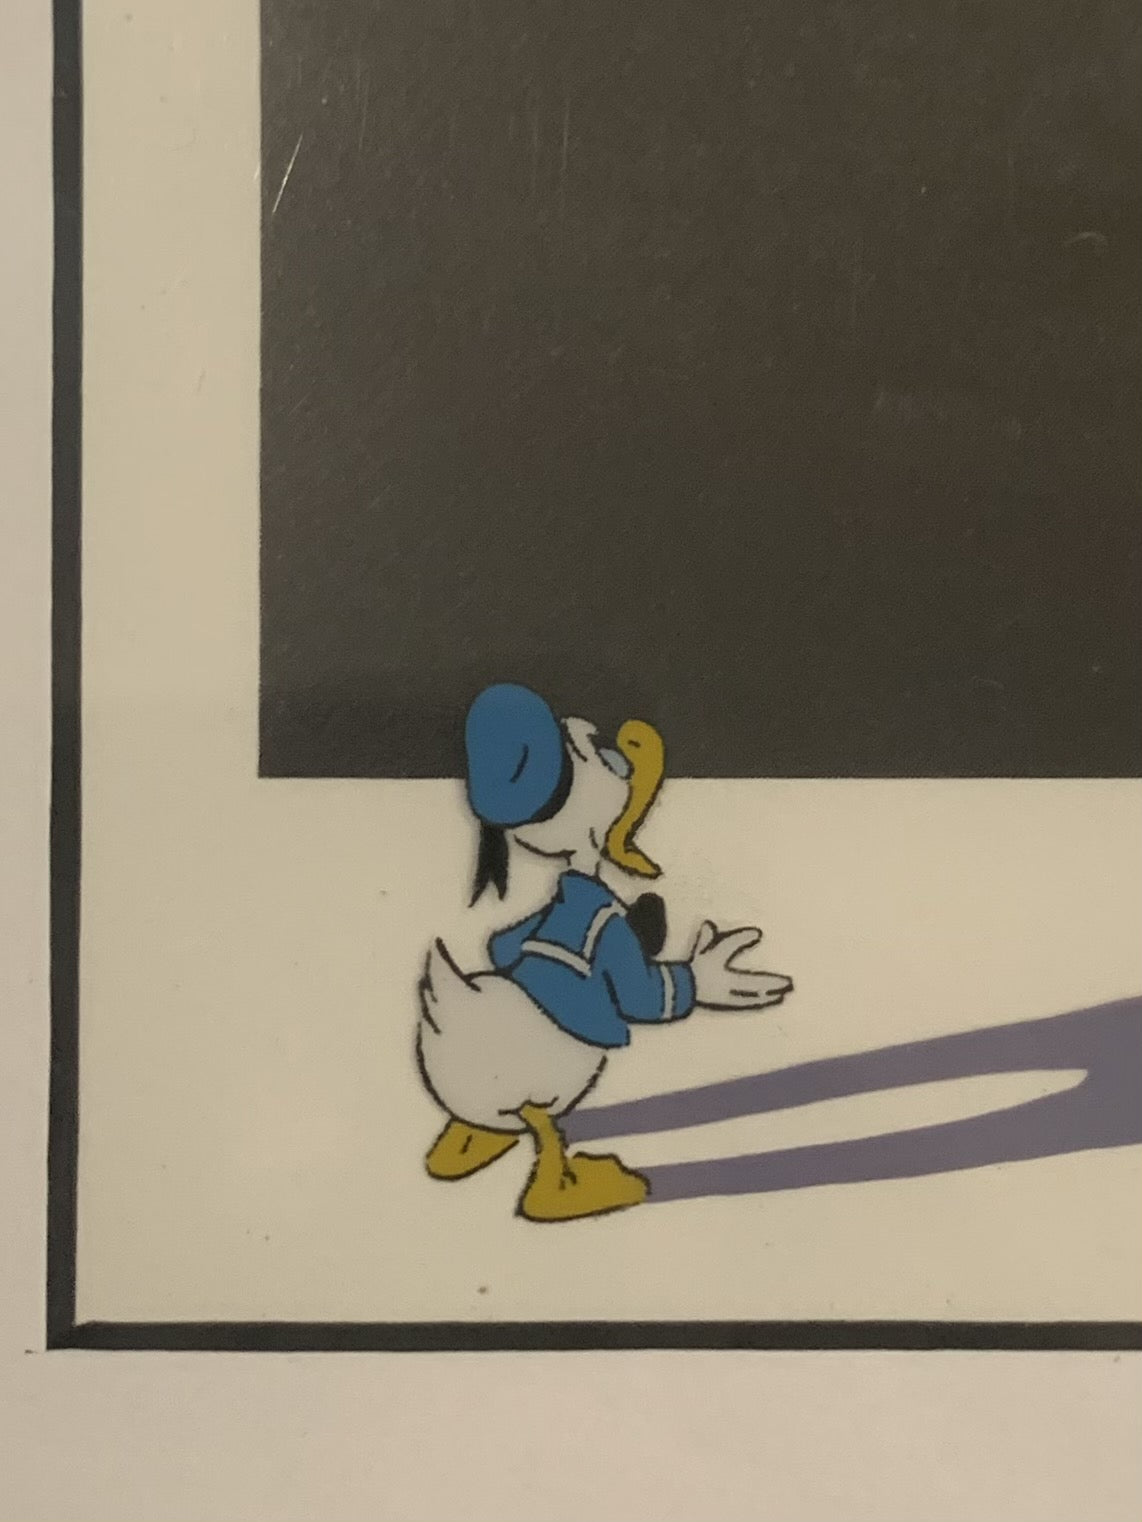 Walt Disney Publicity Cel of Donald Duck with Photograph of Bill Justice and Signatures of Bill Justice and Tony Anselmo